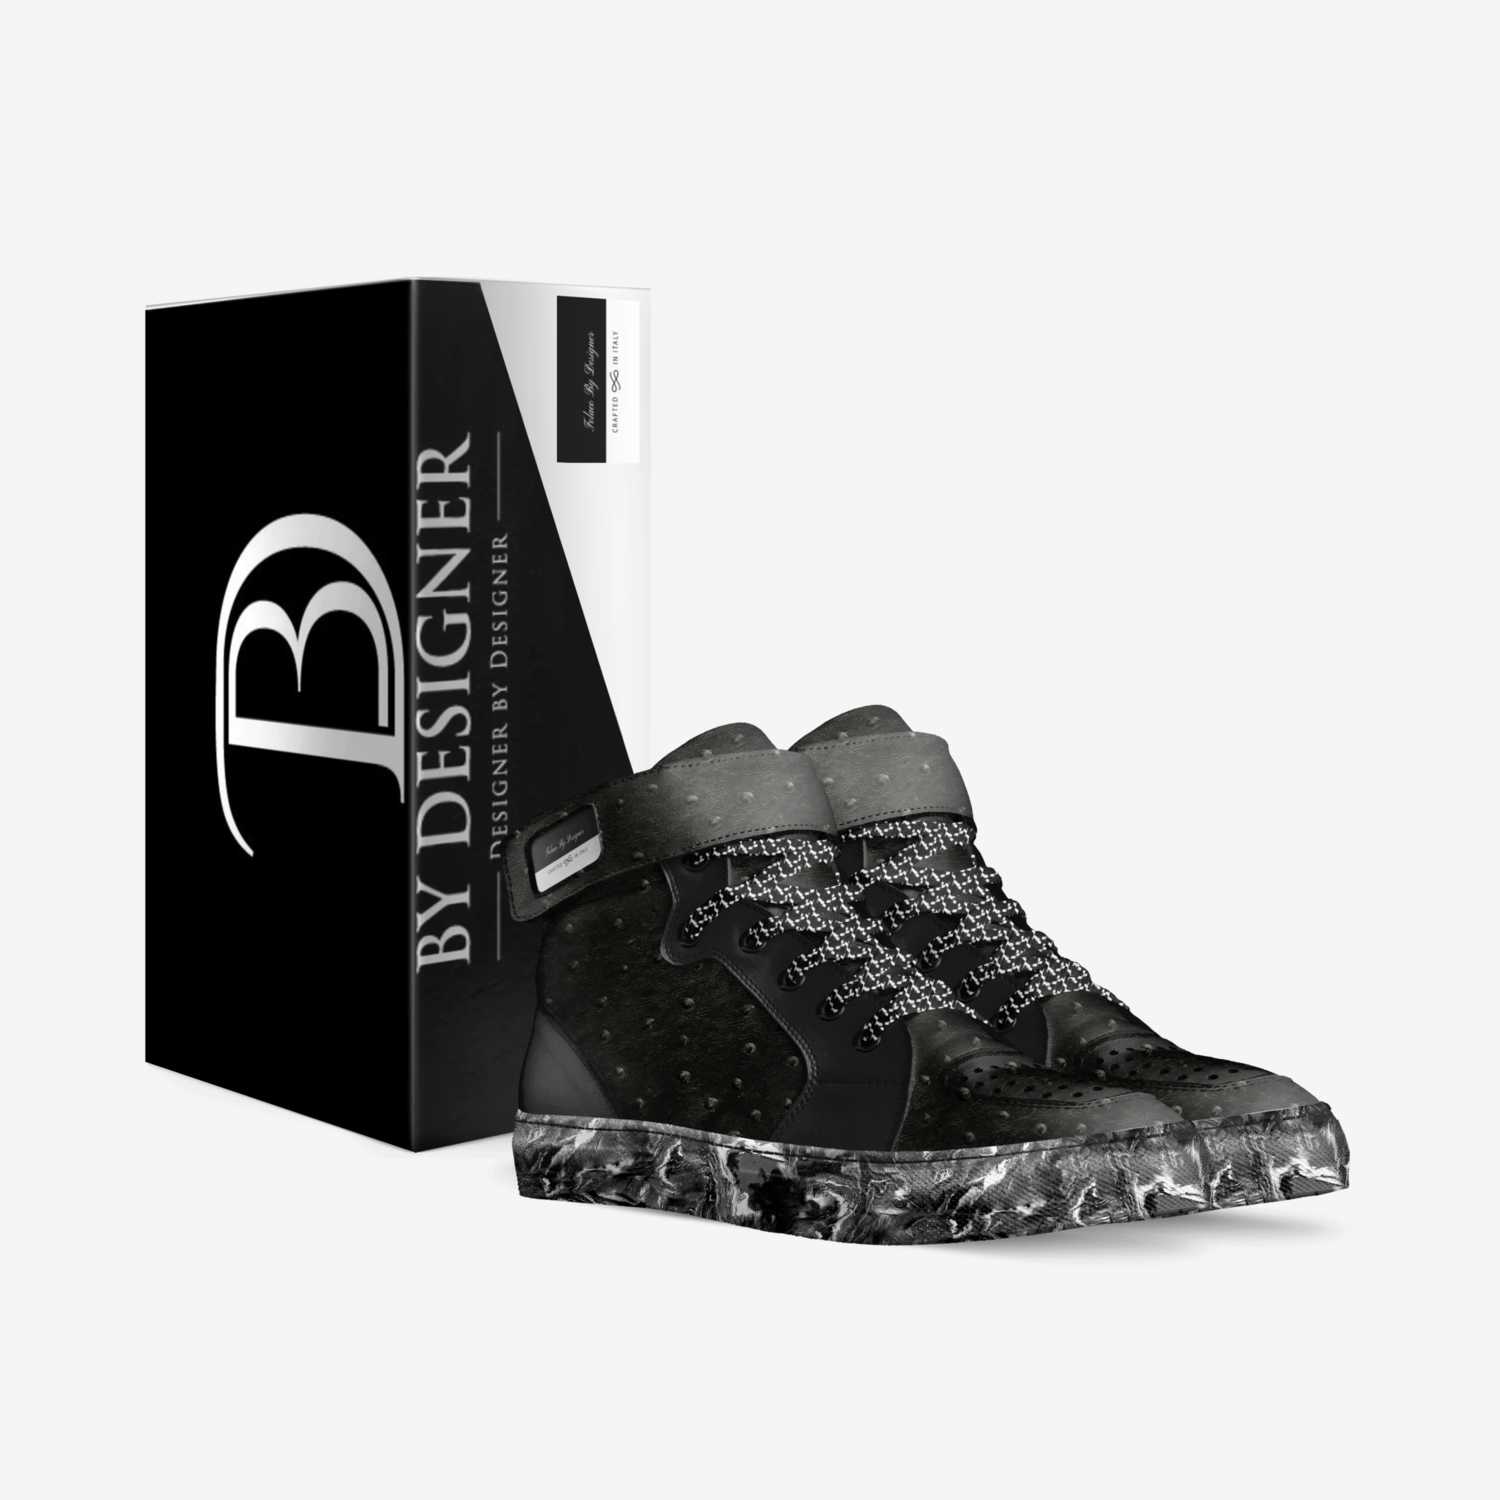 Folaeo By Designer custom made in Italy shoes by Designer By Designer | Box view